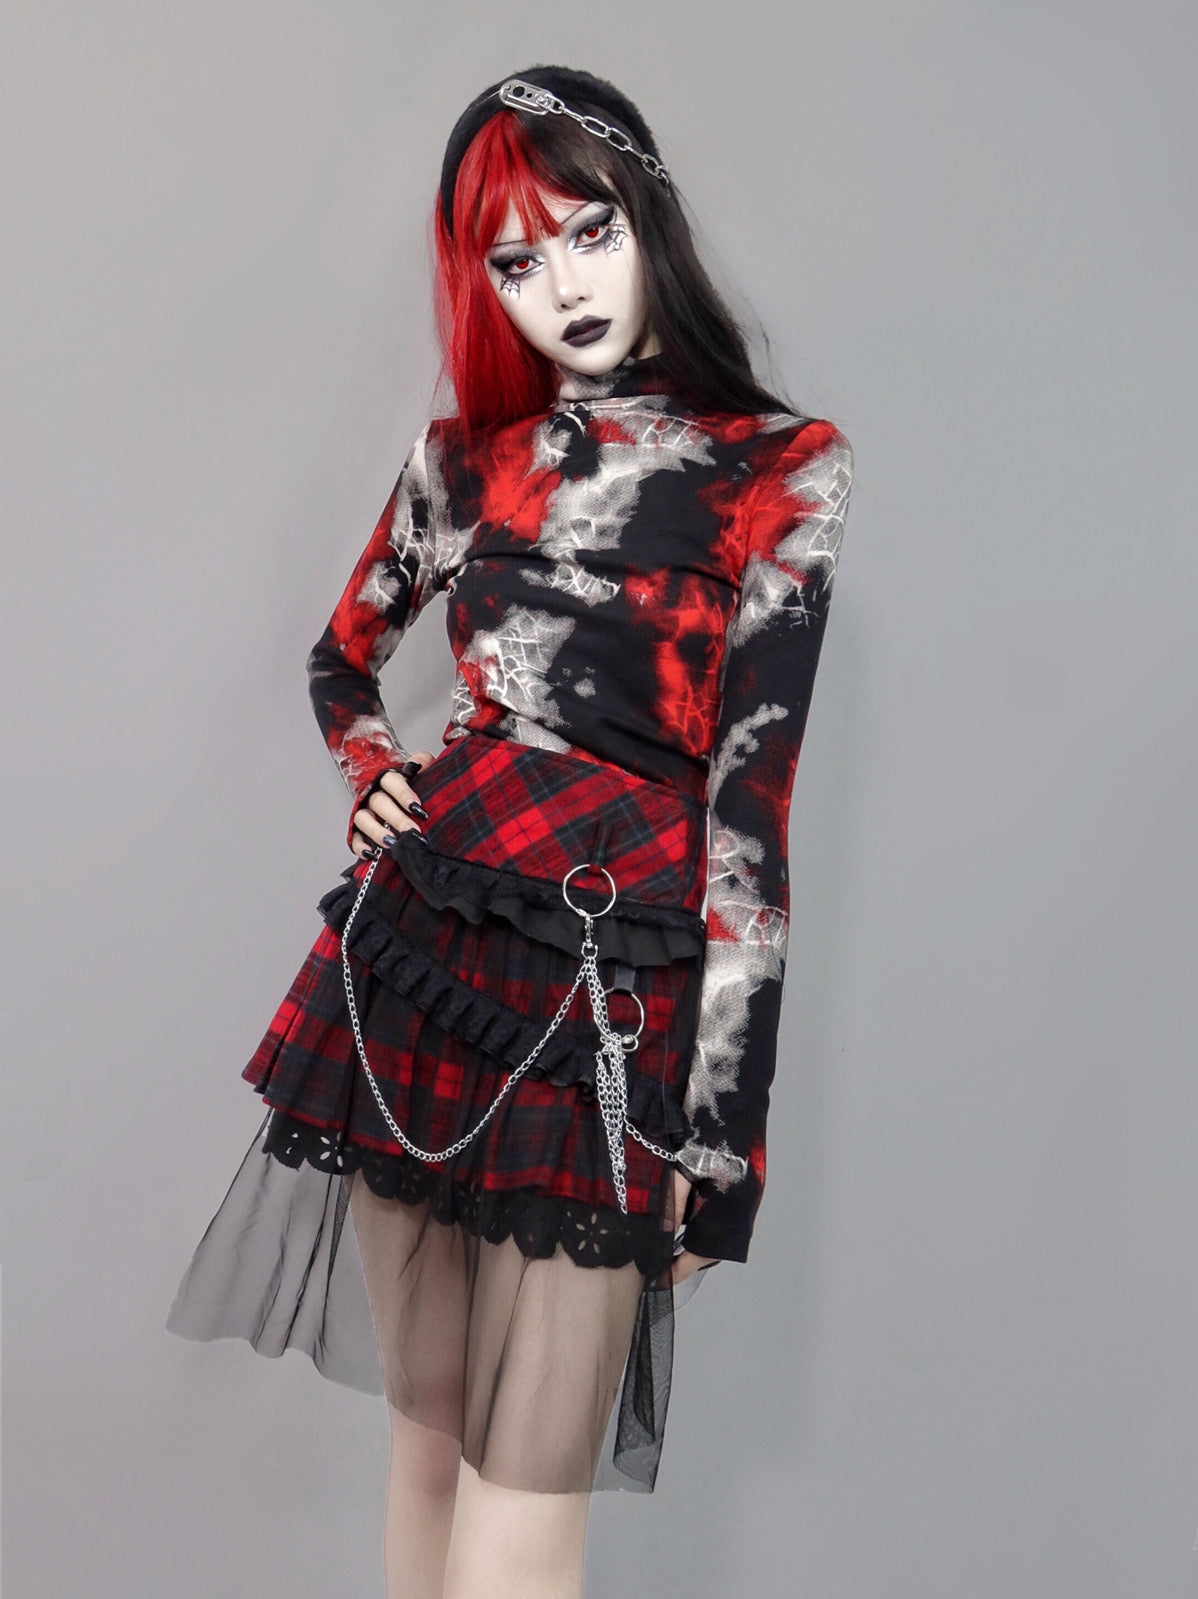 A Maramalive™ woman with black hair and a red and black plaid skirt. She also wore the Gothic Cobweb Long Sleeved Shirt - Punk Spider pattern Top.